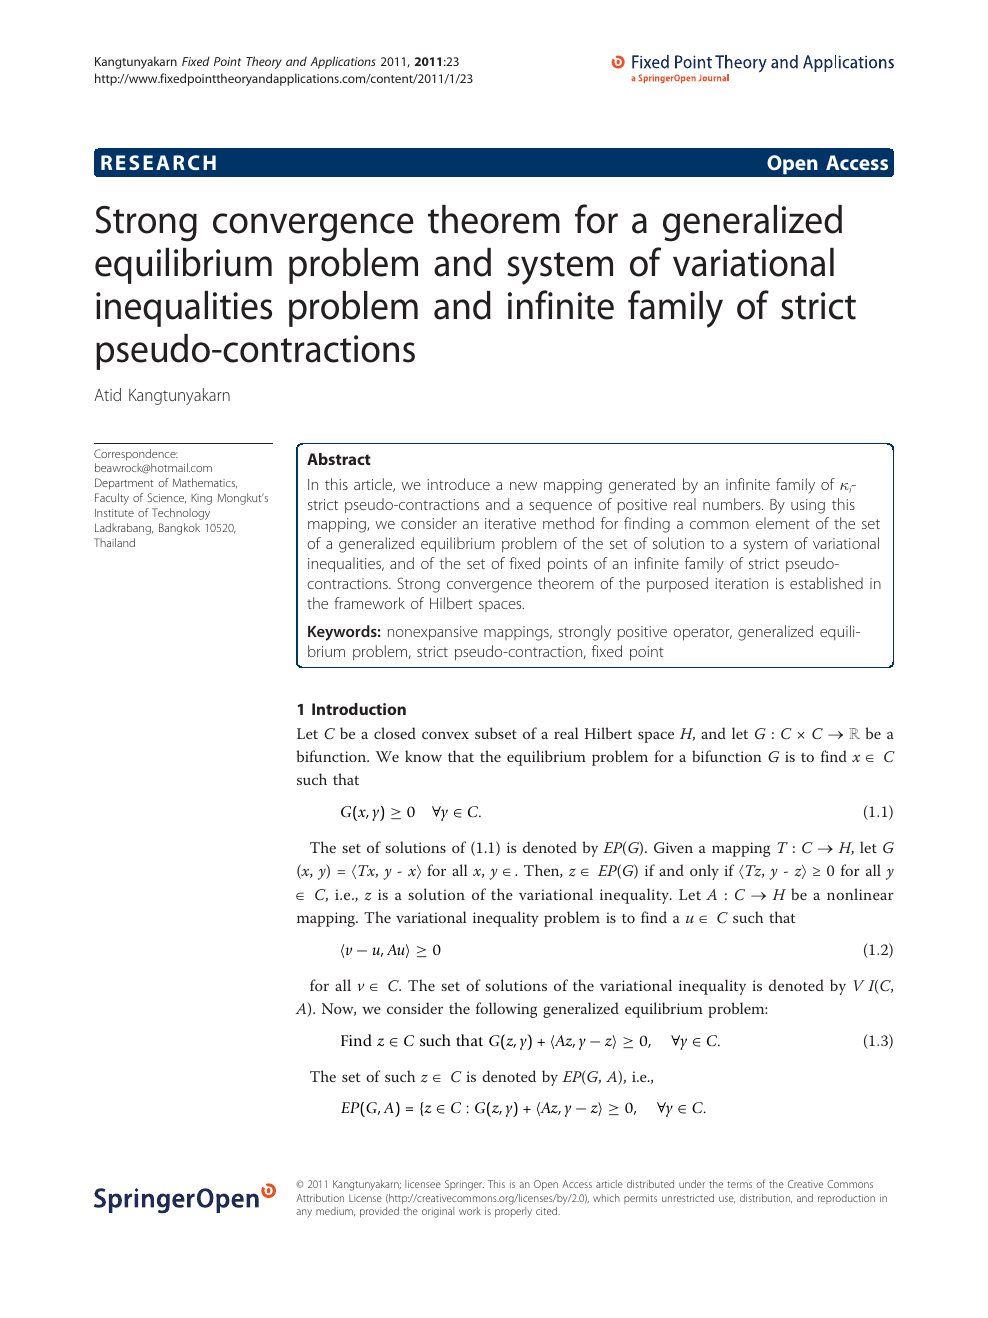 Strong Convergence Theorem For A Generalized Equilibrium Problem And System Of Variational Inequalities Problem And Infinite Family Of Strict Pseudo Contractions Topic Of Research Paper In Mathematics Download Scholarly Article Pdf And